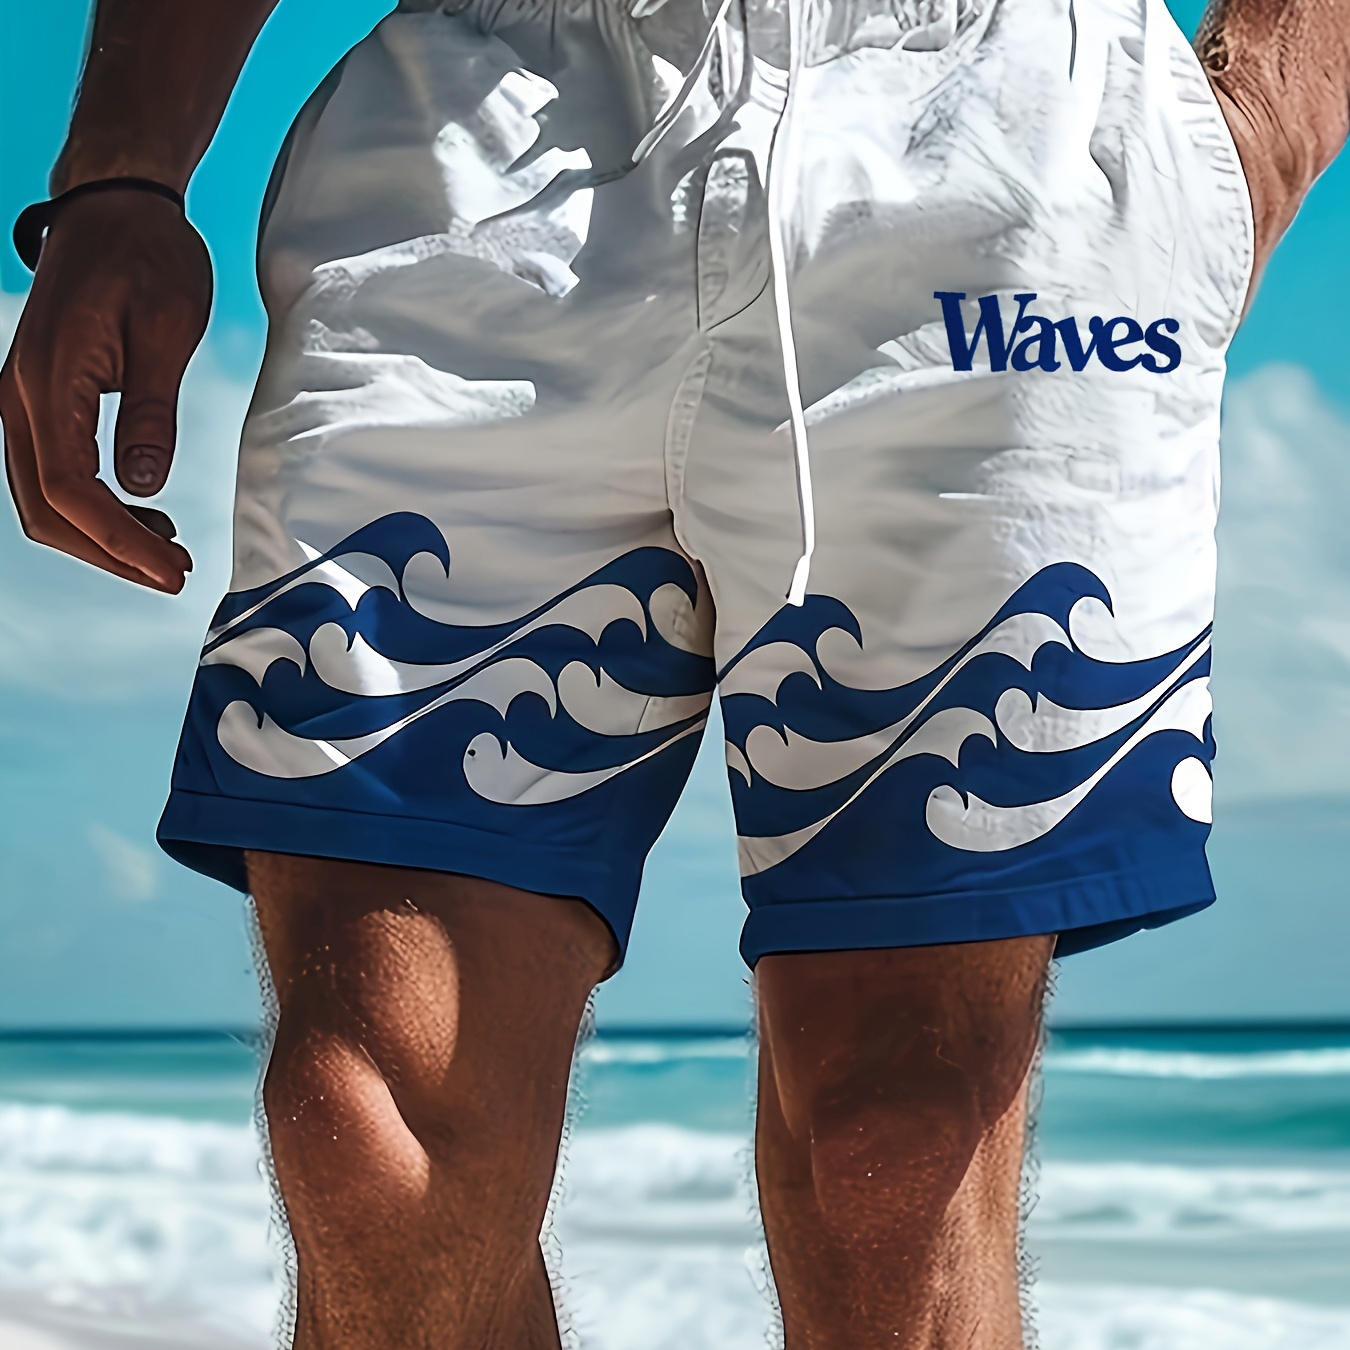 

Men's Sea Wave Pattern And Letter Print "waves" Shorts With Drawstring And Pockets, Casual And Trendy Board Shorts For Summer Leisurewear And Holiday Wear